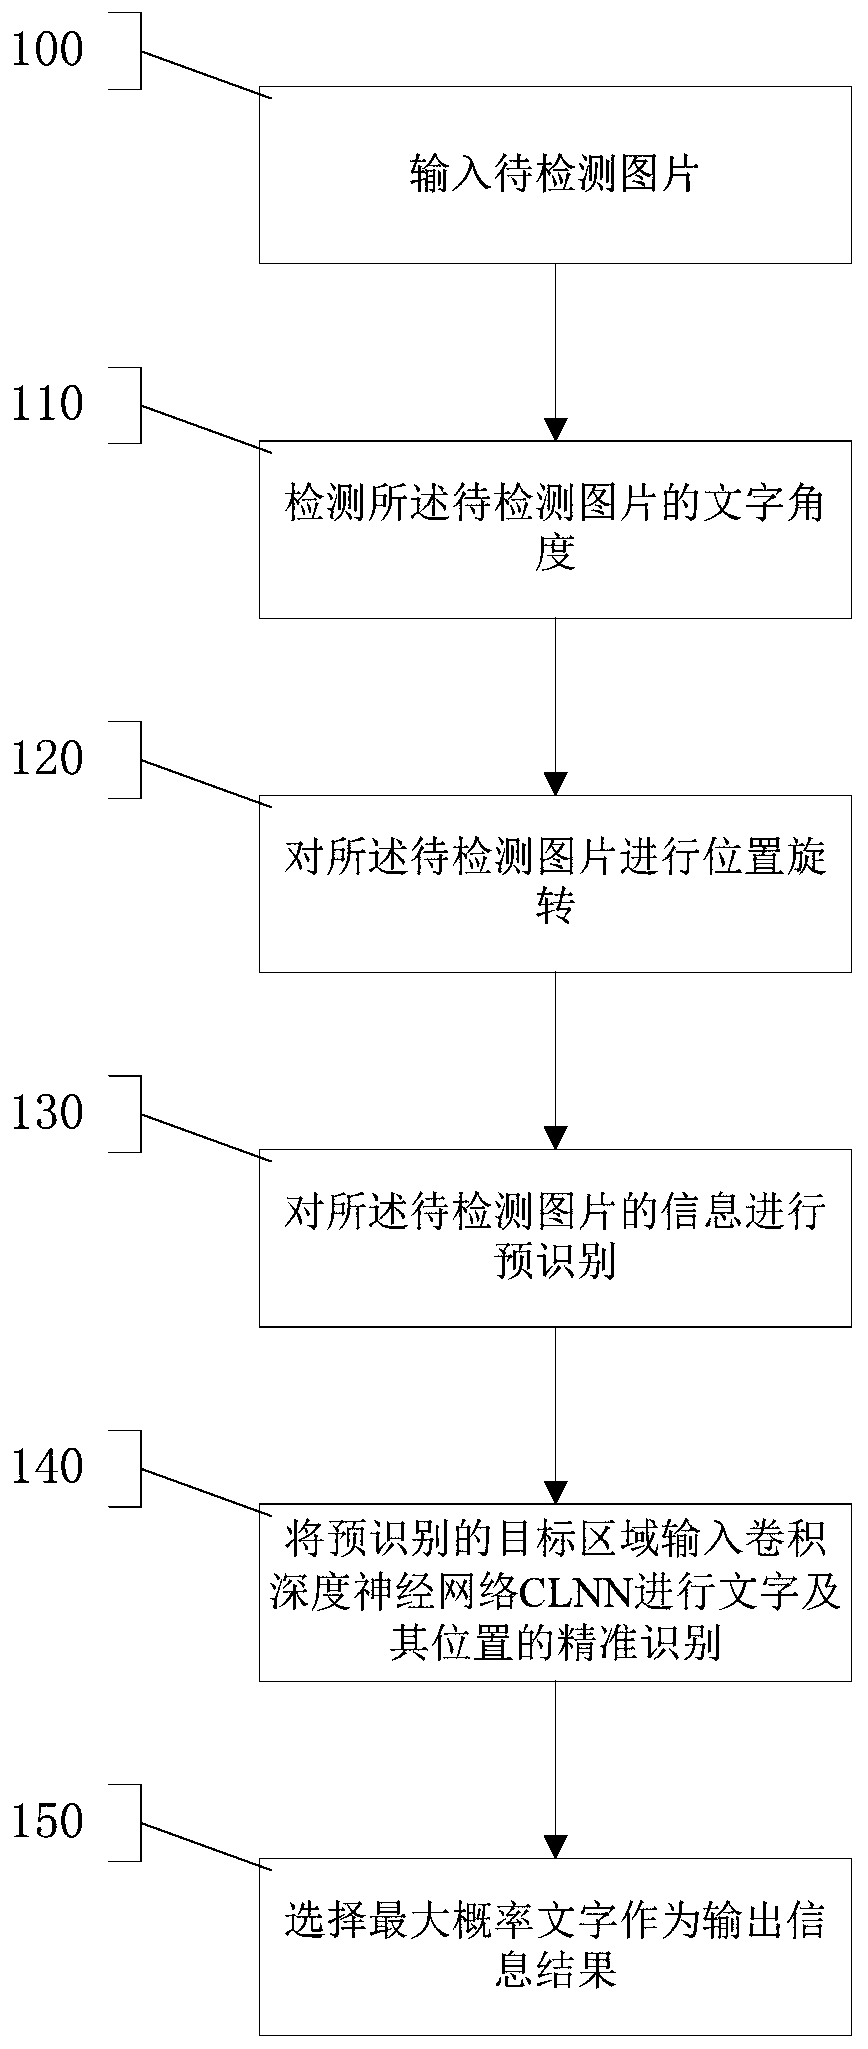 Image correction and text and position identification method and system